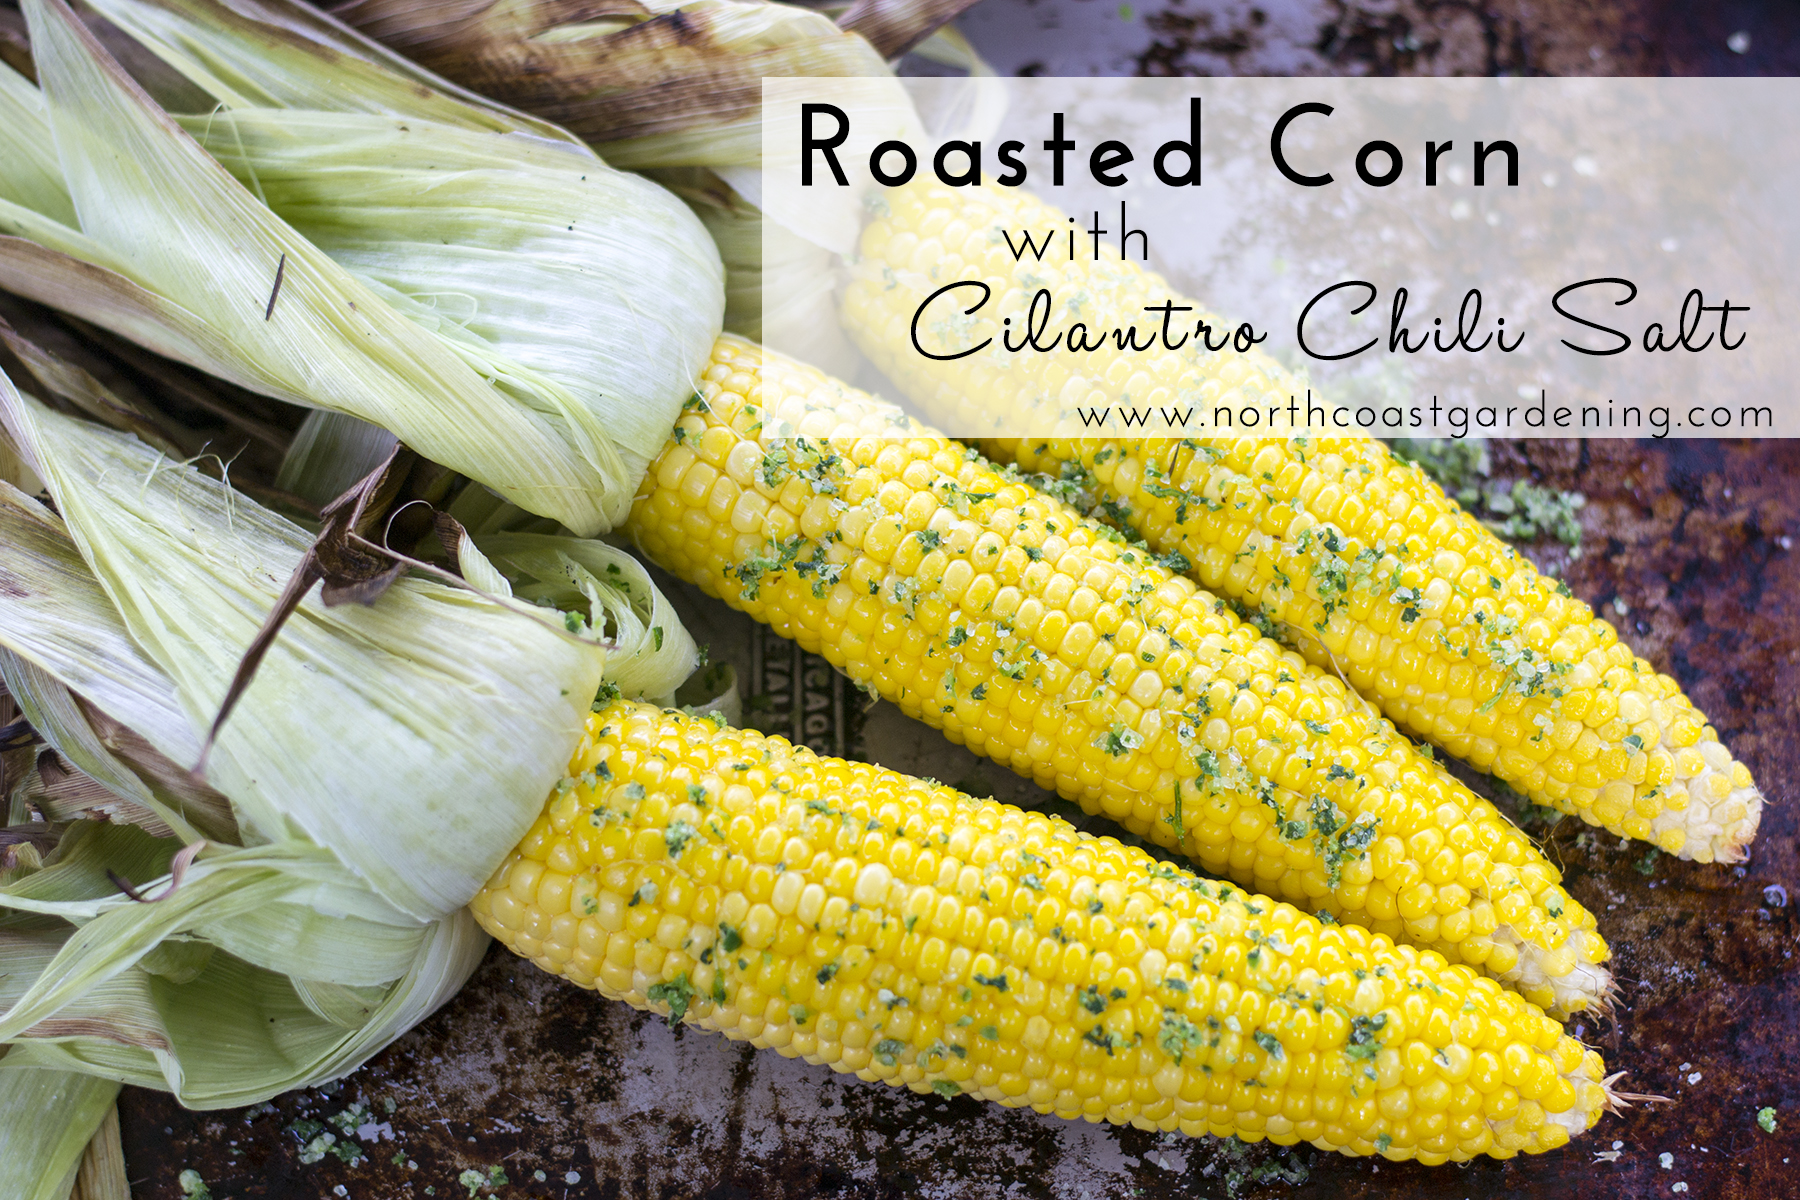 Roasted Corn with Cilantro Chili Salt from www.northcoastgardening.com